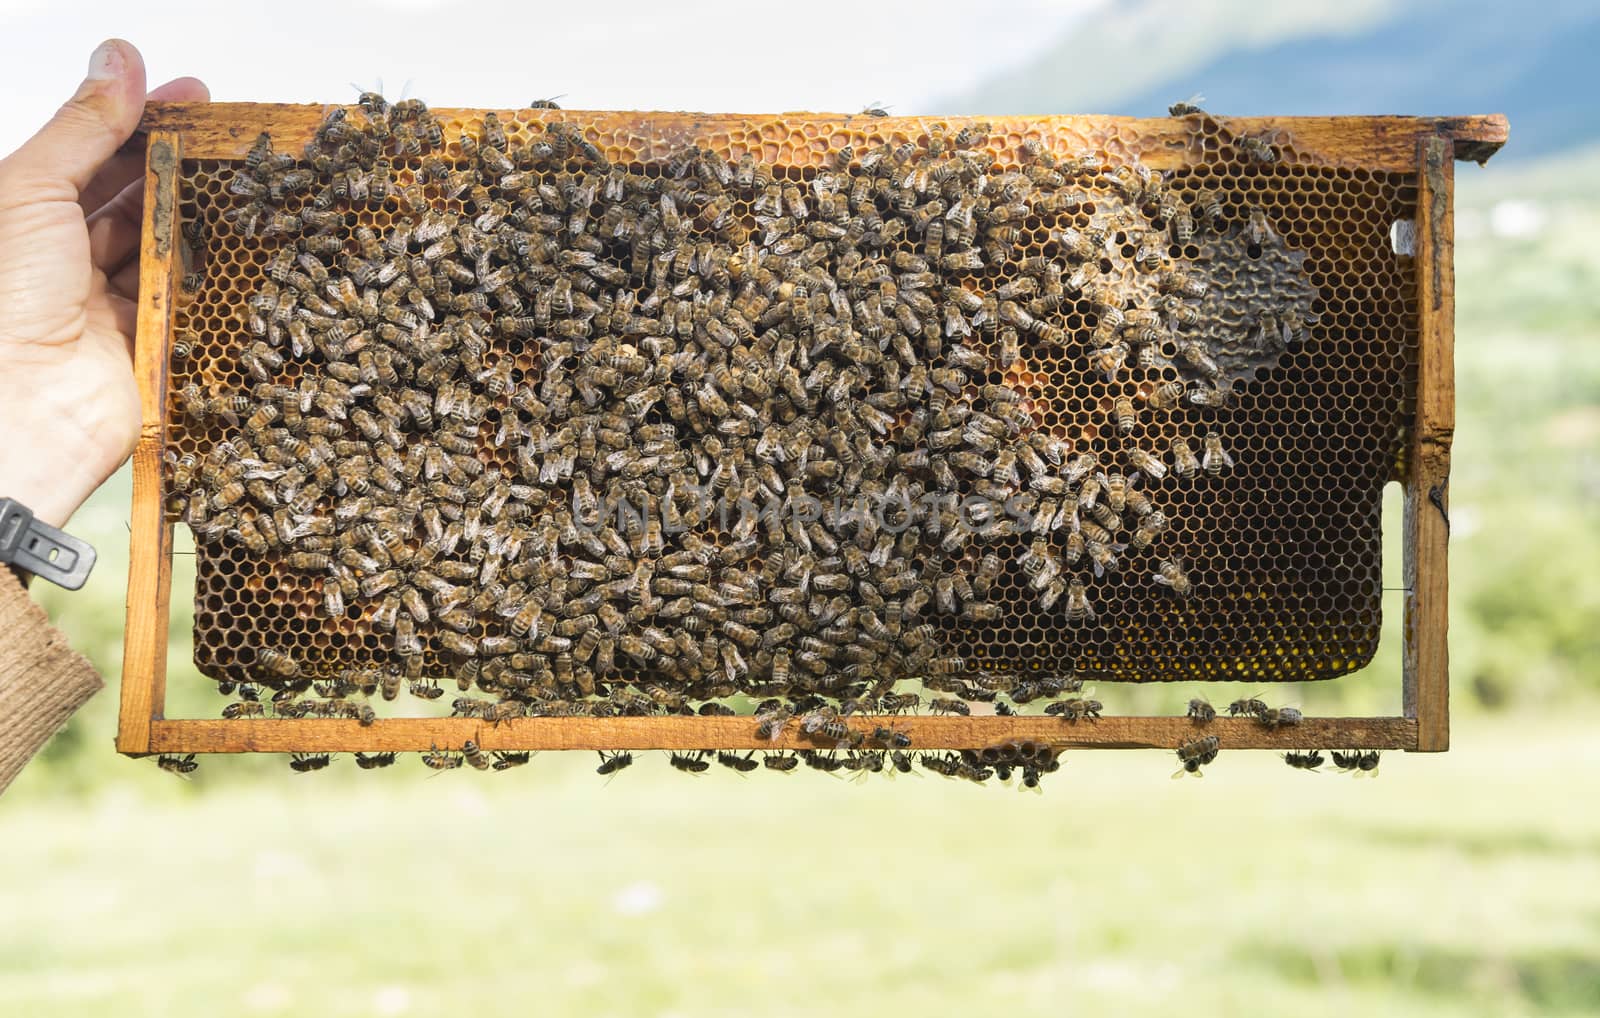 bees work on Honeycomb by crazymedia007